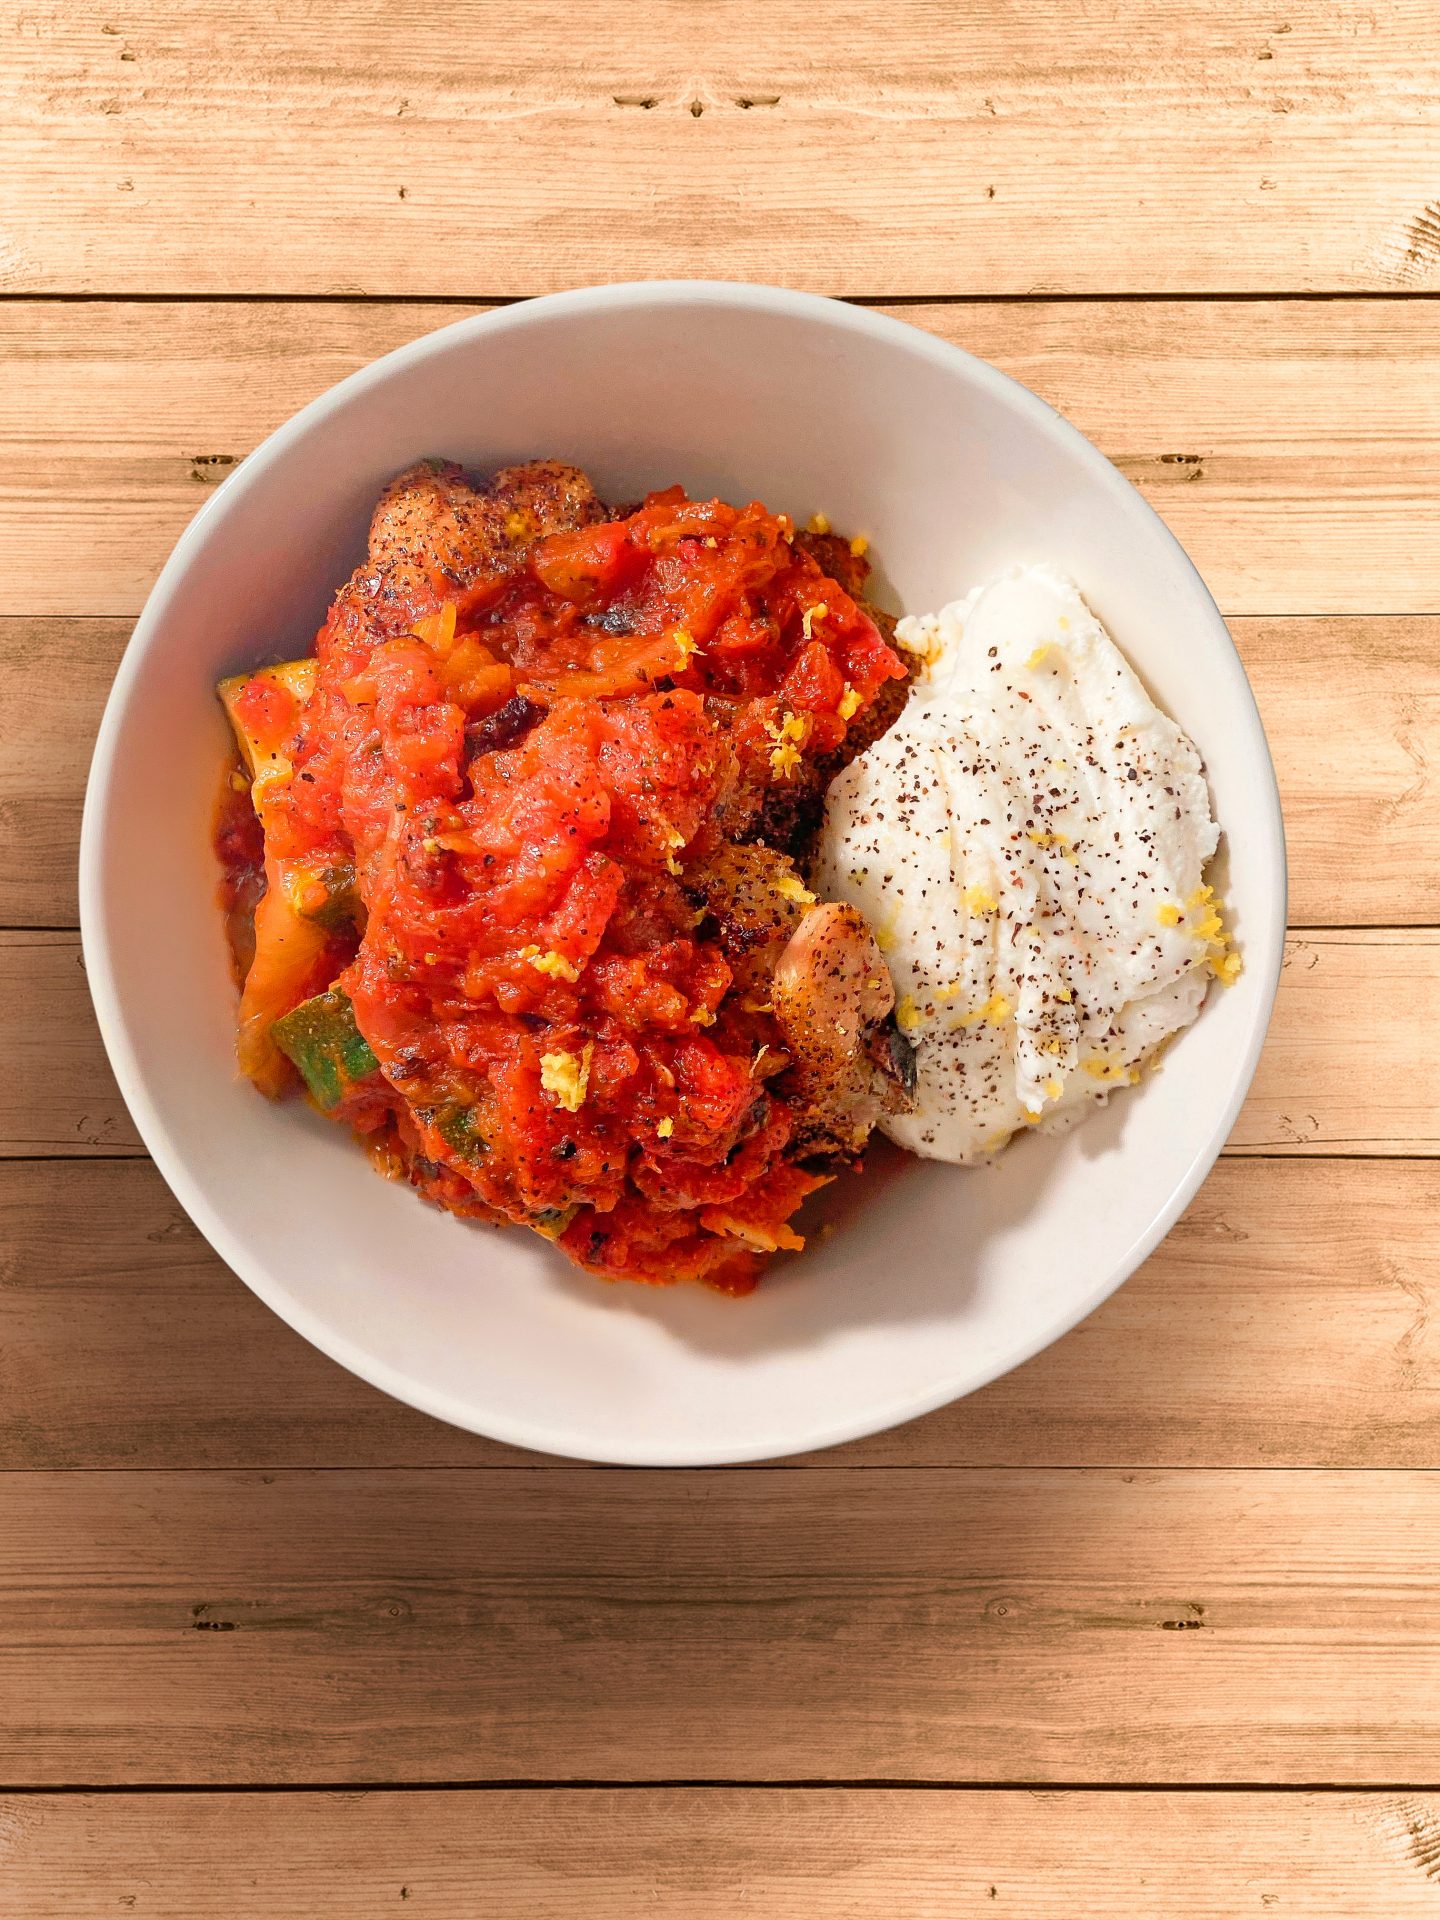 Oven-baked chicken with zucchini & caramelized onion tomato sauce